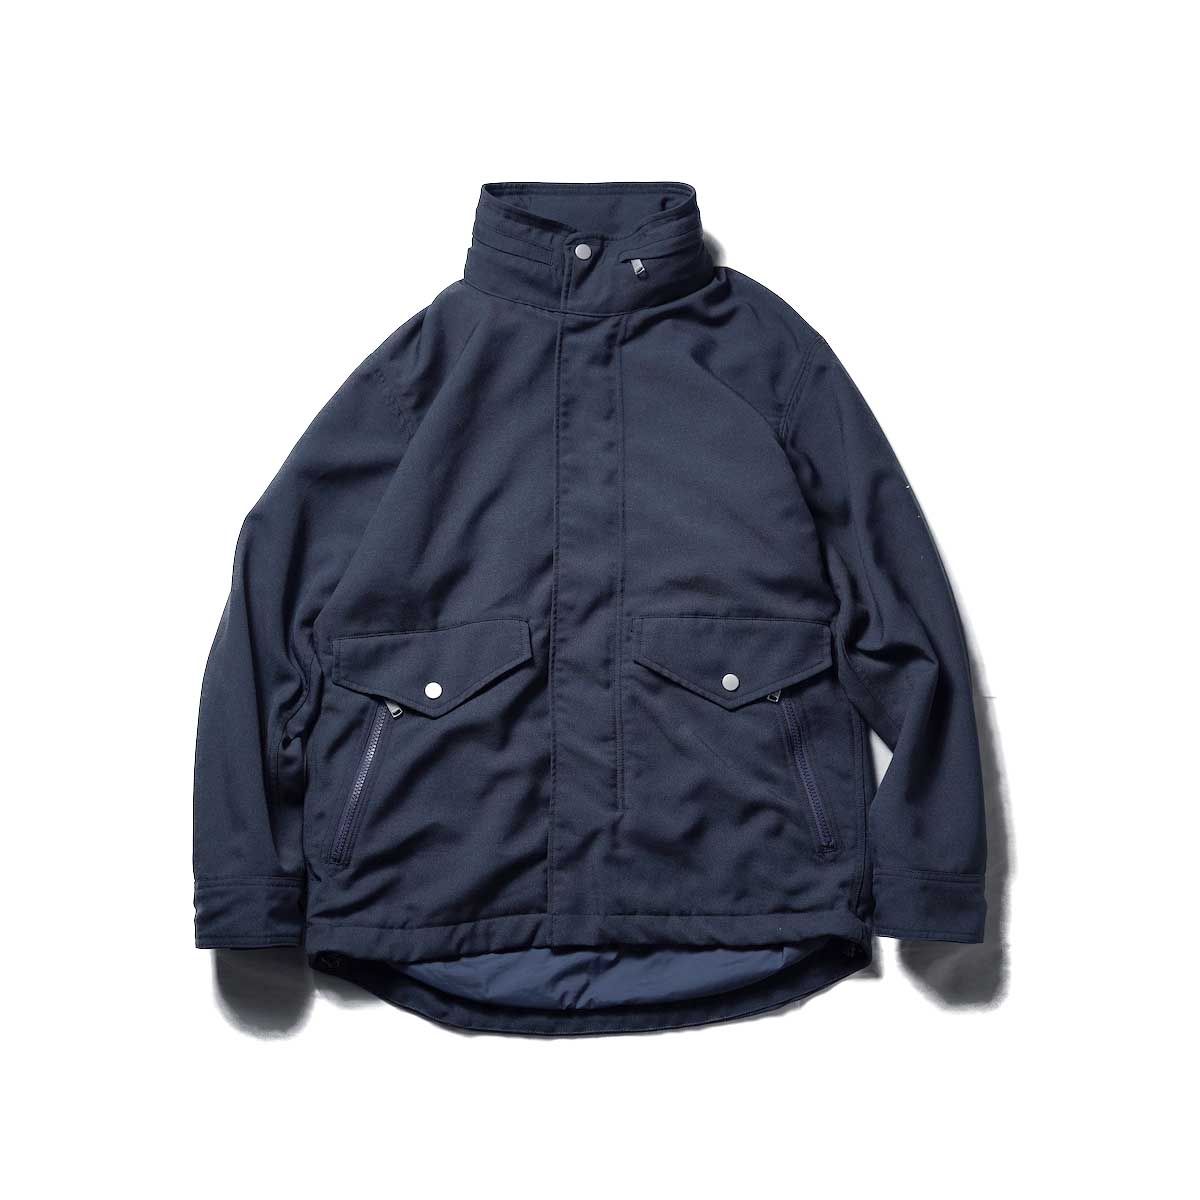 nonnative / TROOPER JACKET POLY TWILL WITH GORE-TEX INFINIUM™ (Navy)